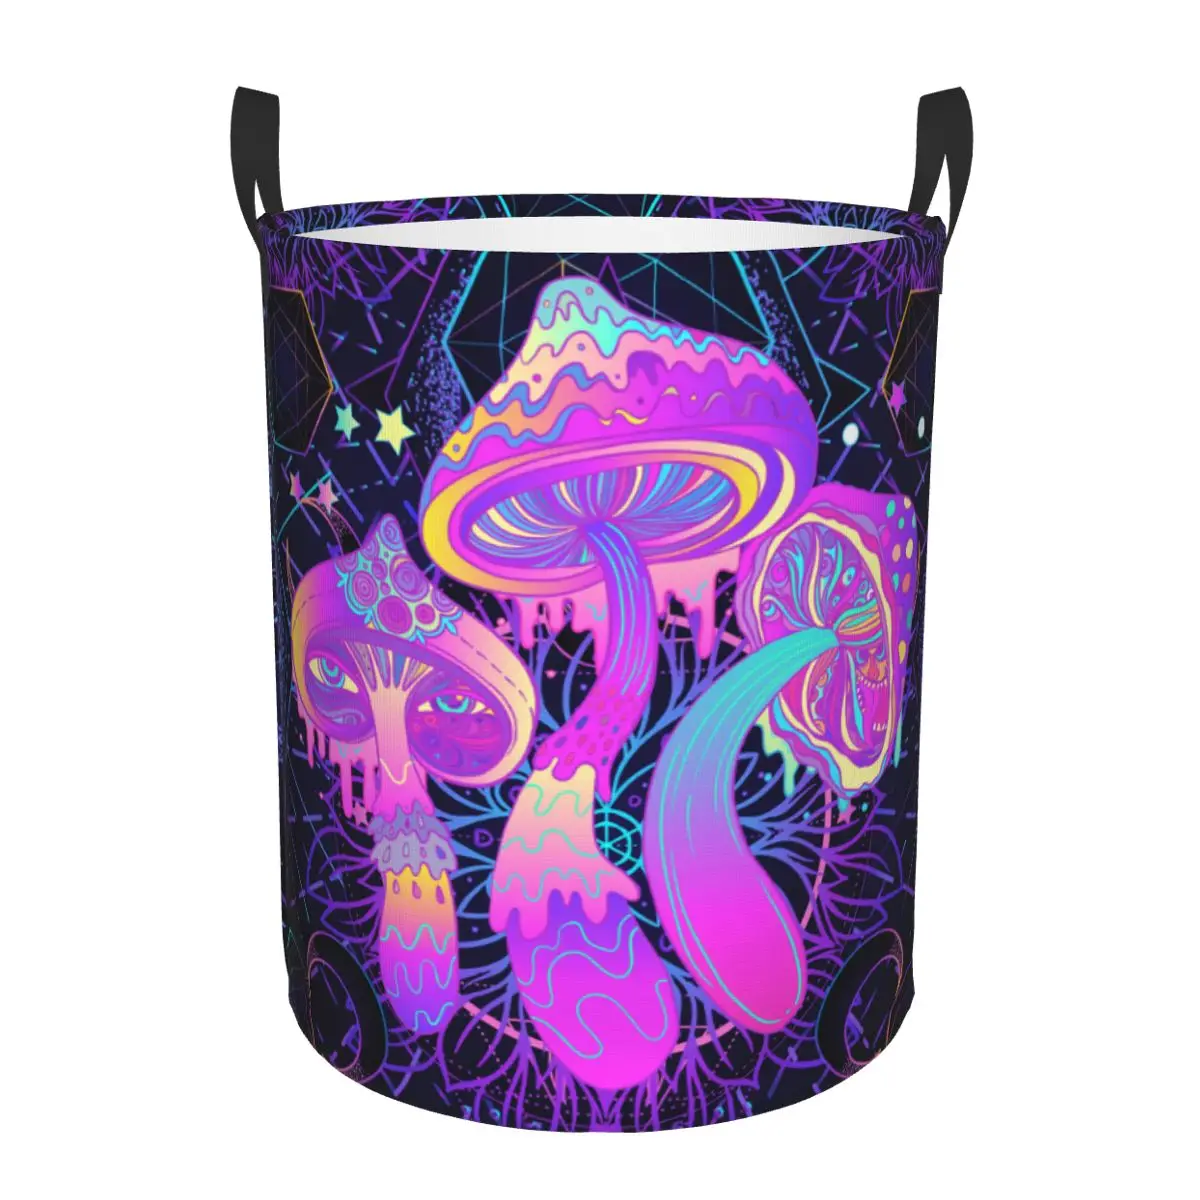 

Foldable Laundry Basket for Dirty Clothes Psychedelic Magic Mushrooms Storage Hamper Kids Baby Home Organizer